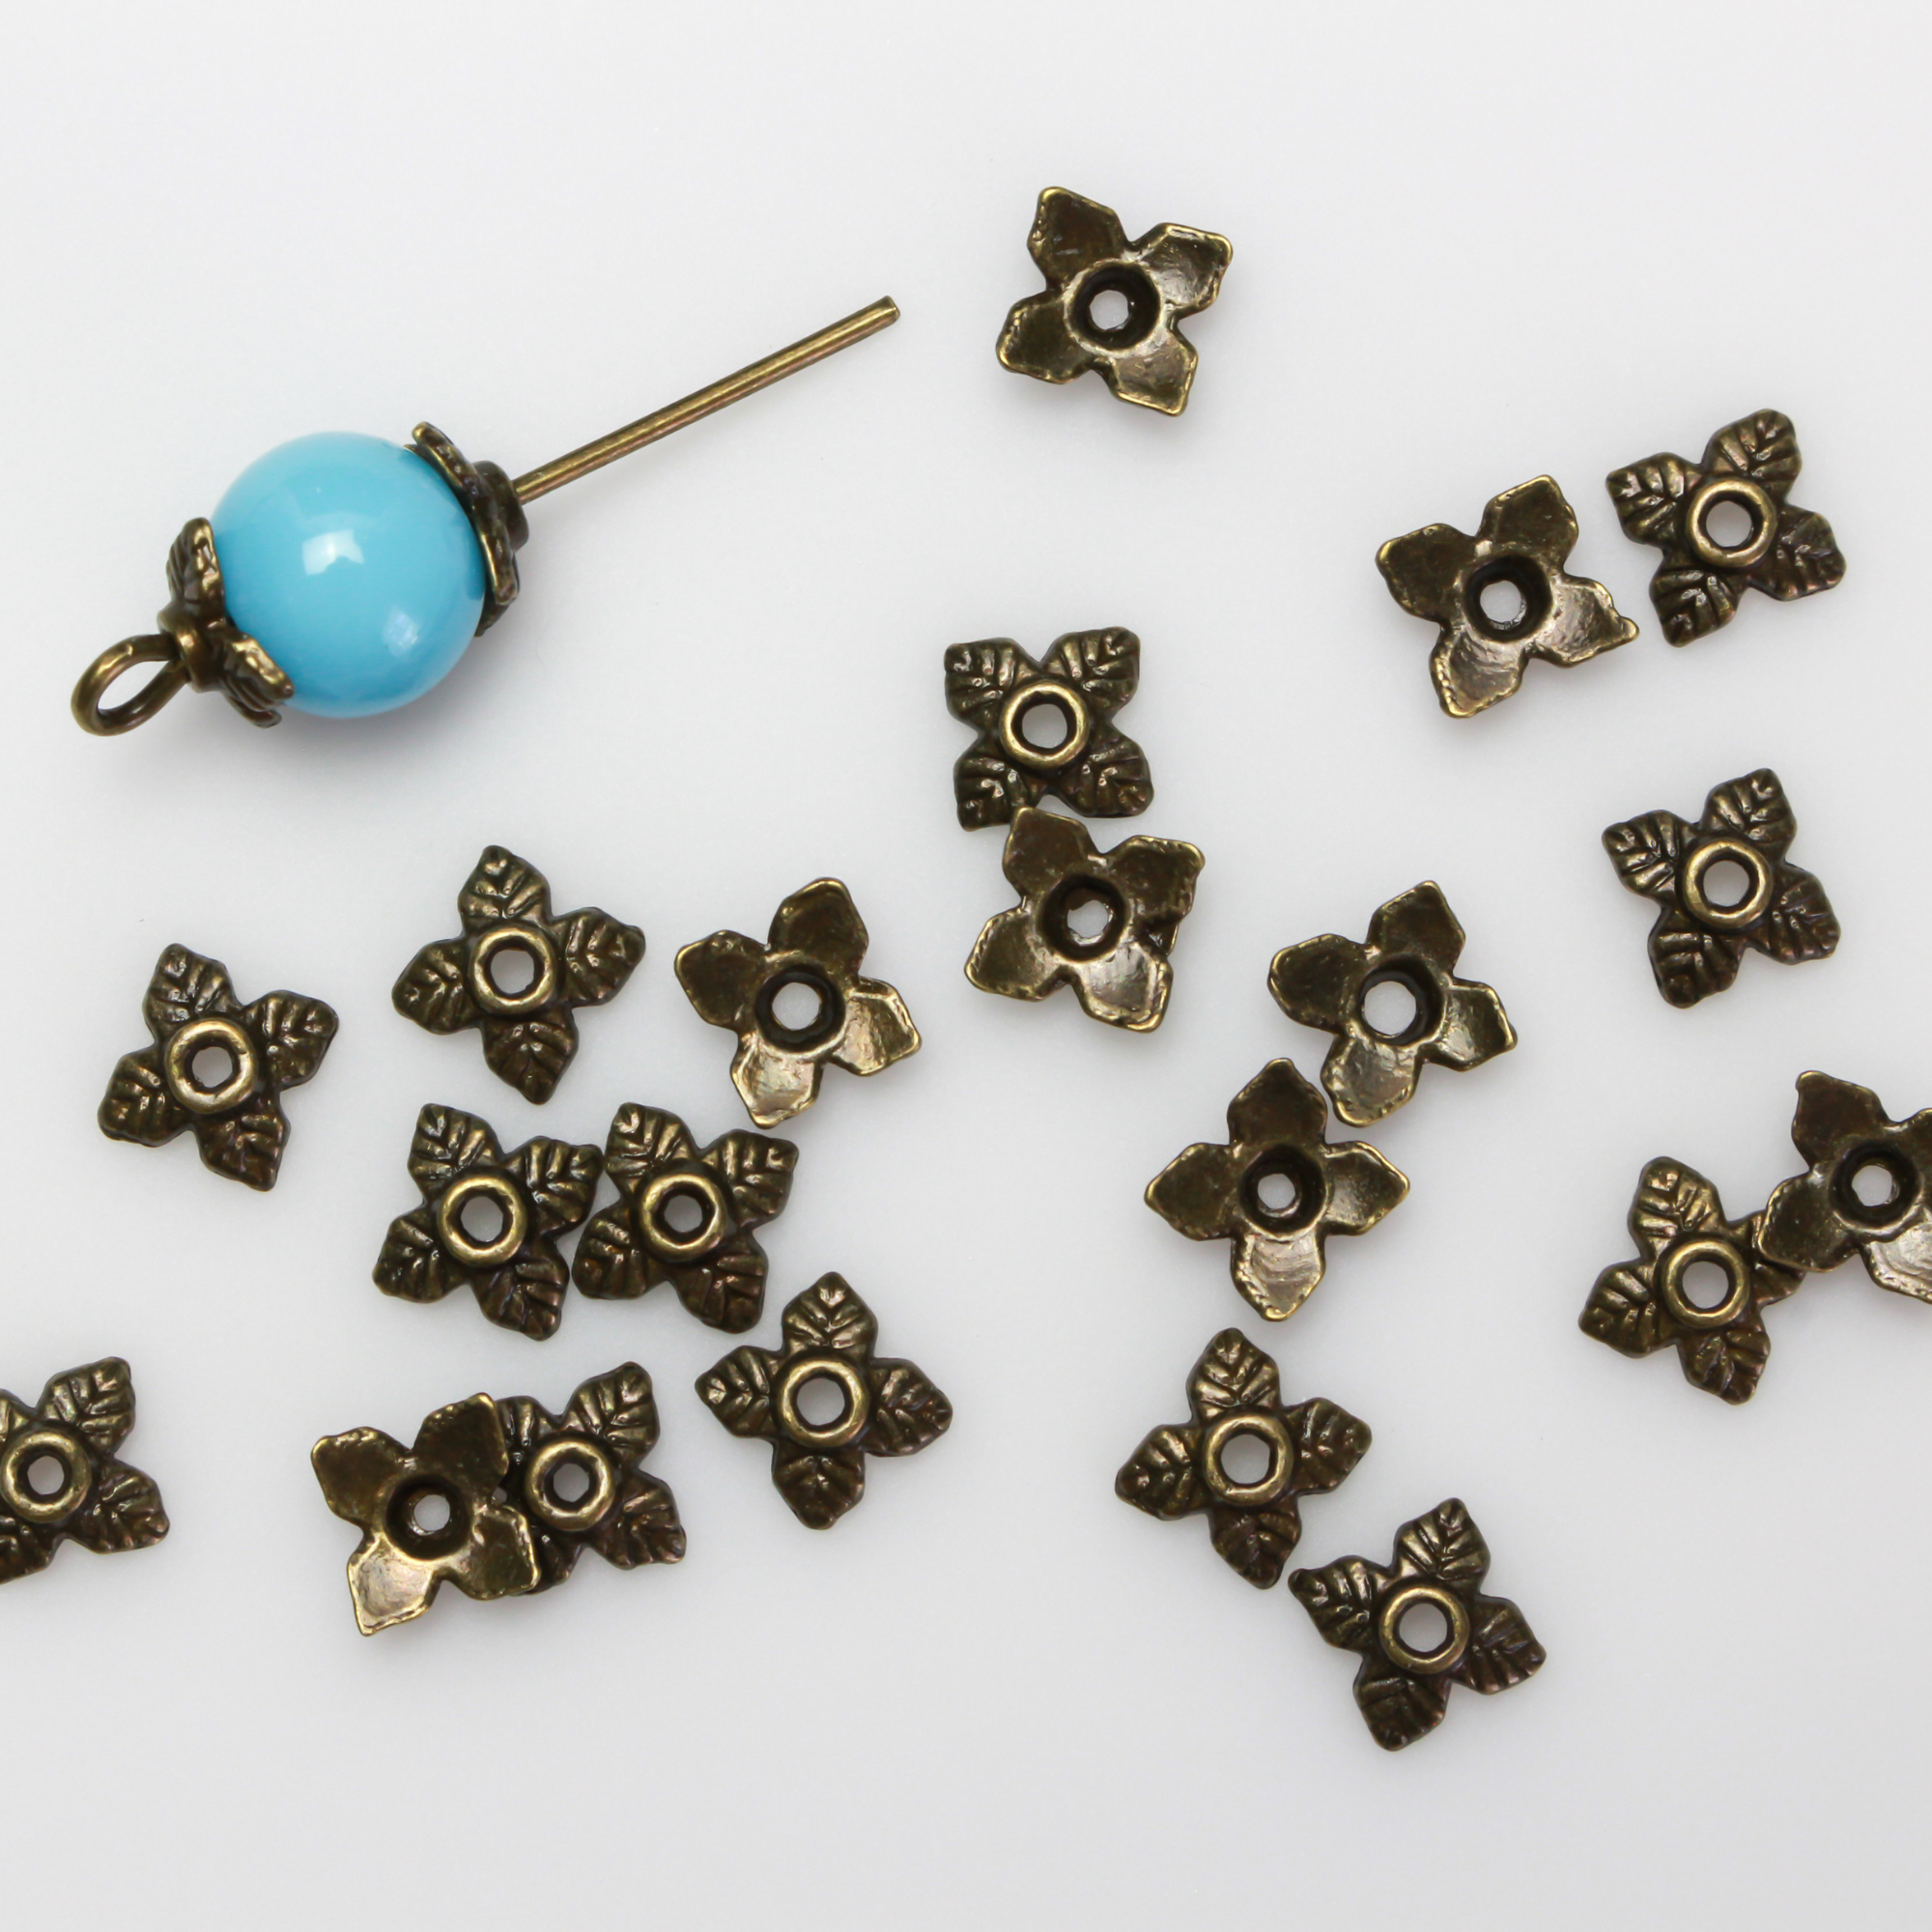 Bronze leaf shaped bead caps with a four leaf pattern, 6mm with a 1mm hole. Sold in packages of 120 pieces.